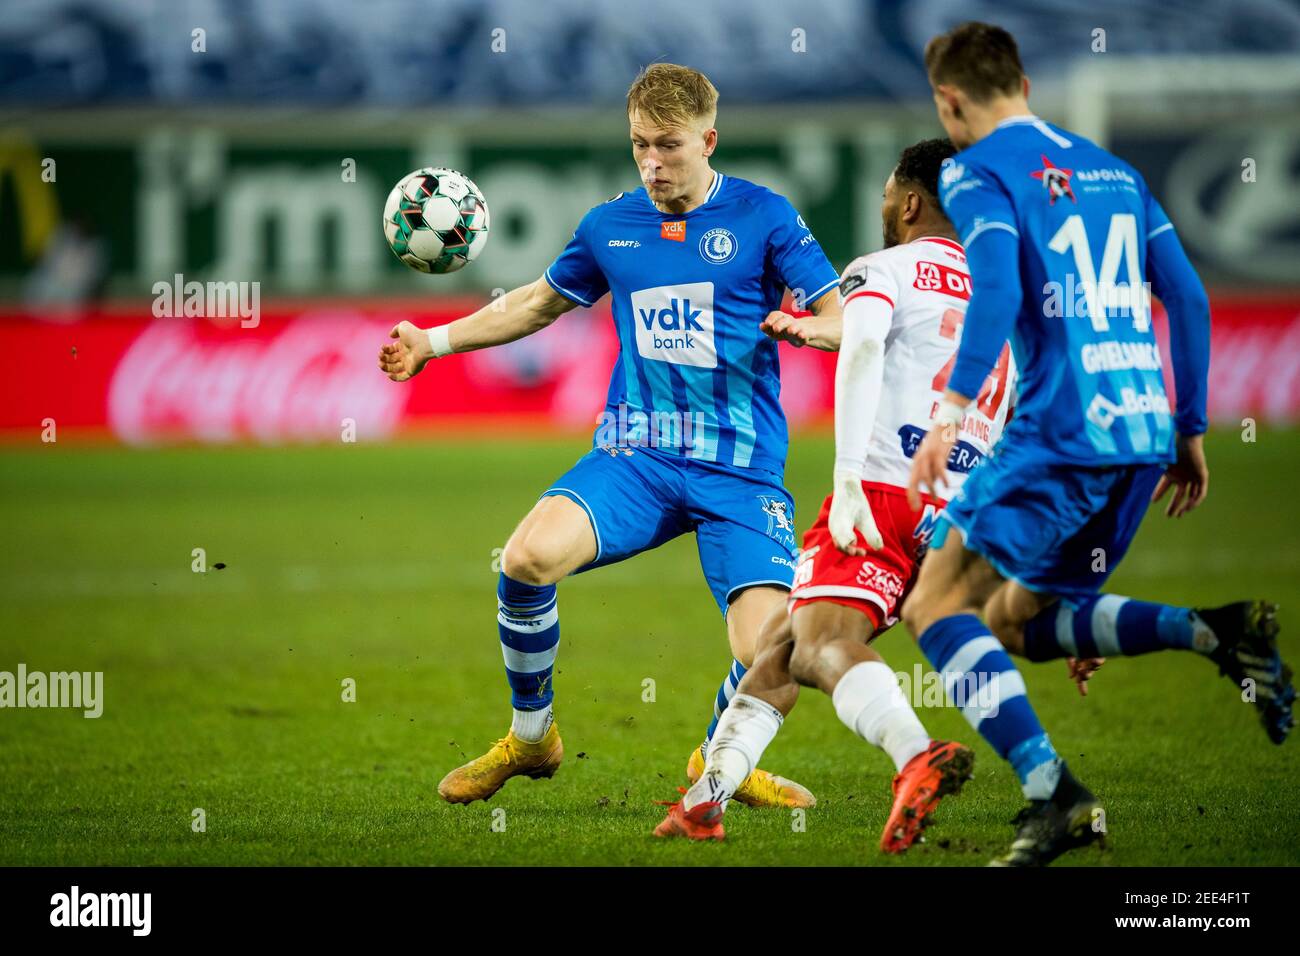 Gent's Andreas Hanche Olsen and Mouscron's Enes Saglik fight for the ball during a soccer match between KAA Gent and Royal Excel Mouscron, Monday 15 F Stock Photo